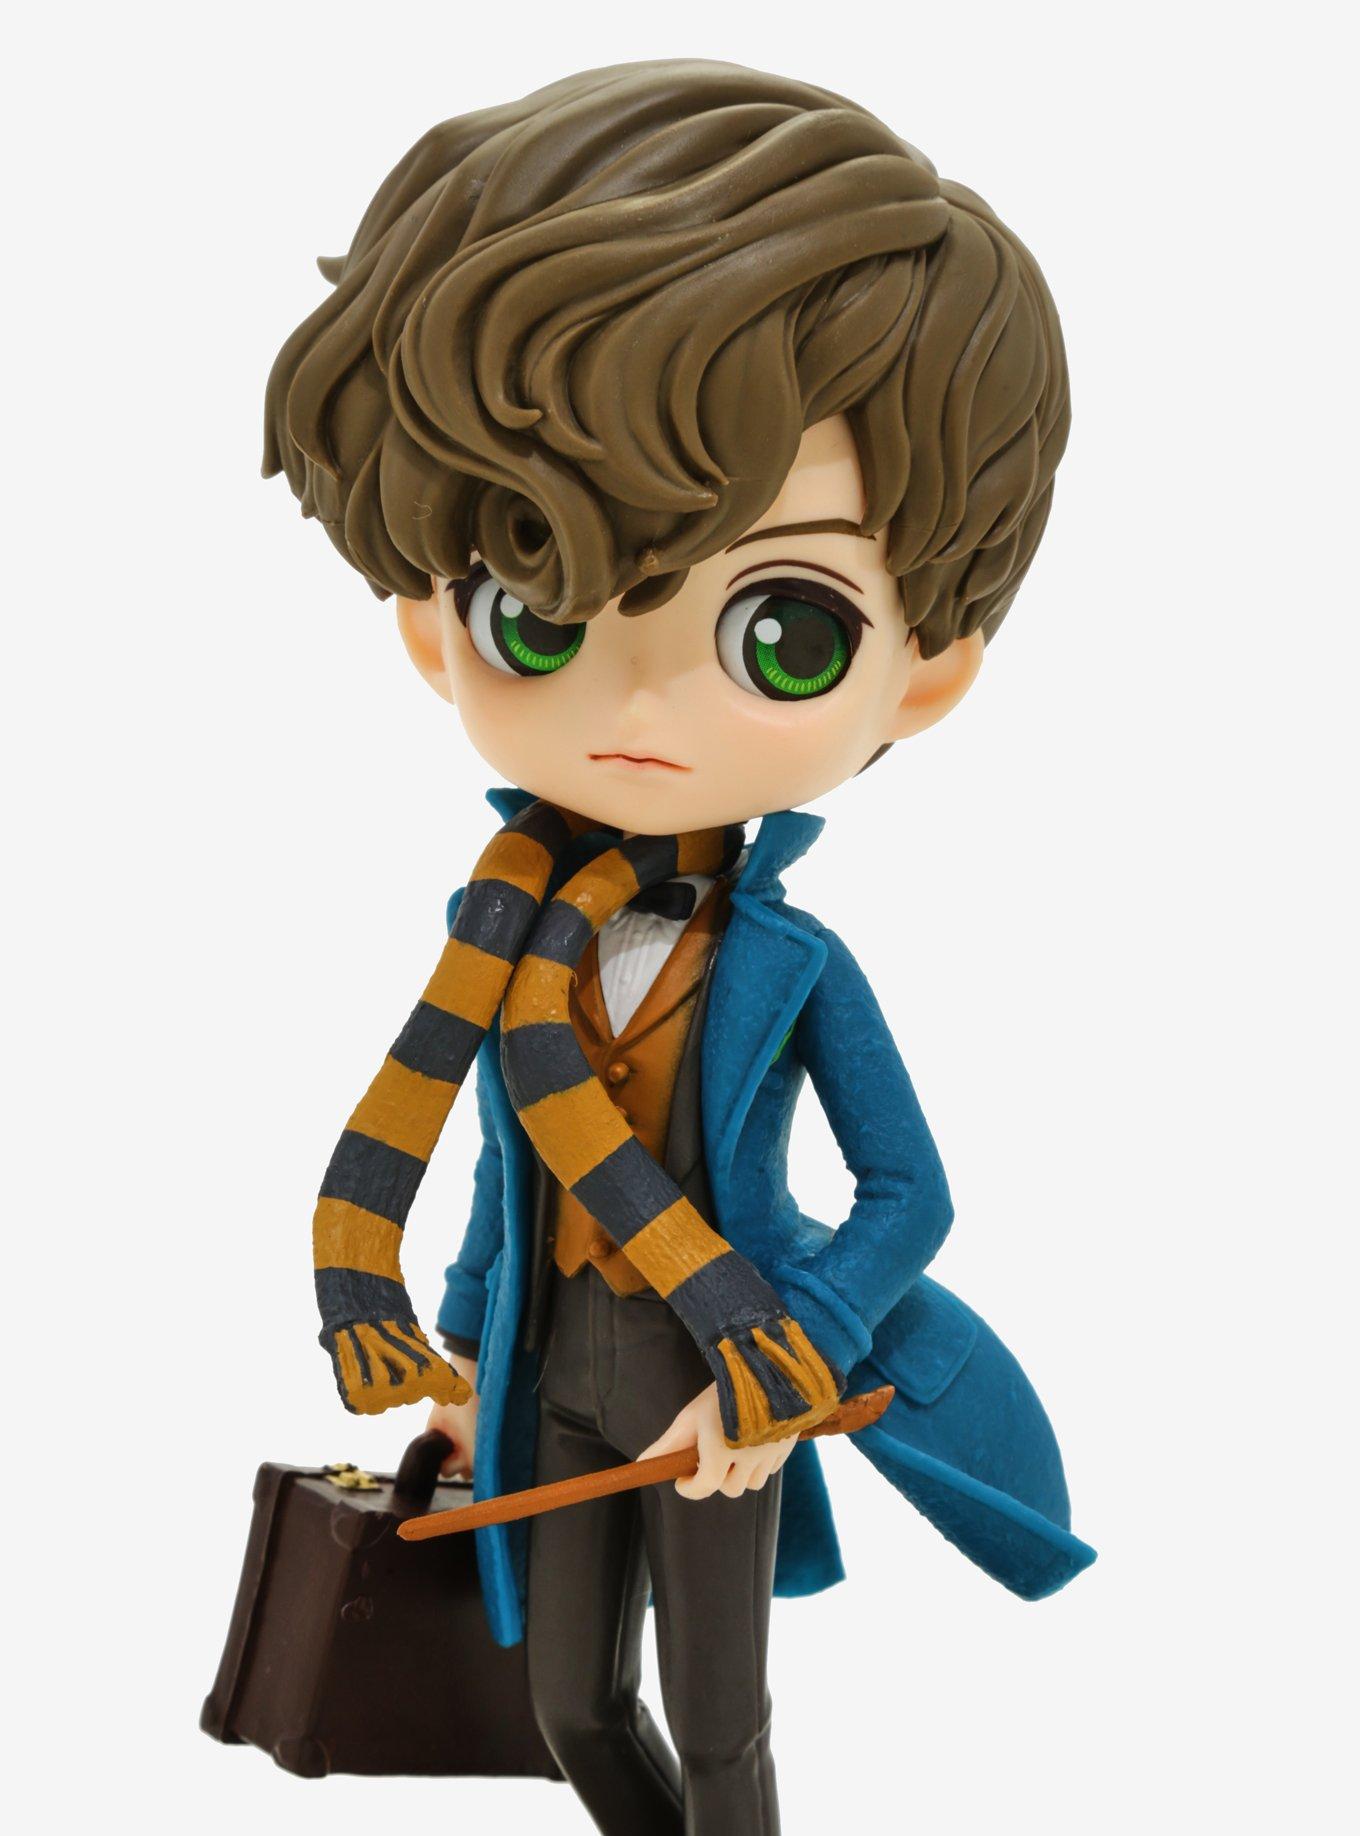 Fantastic Beasts And Where To Find Them Newt Scamander Q Posket Figure, , alternate